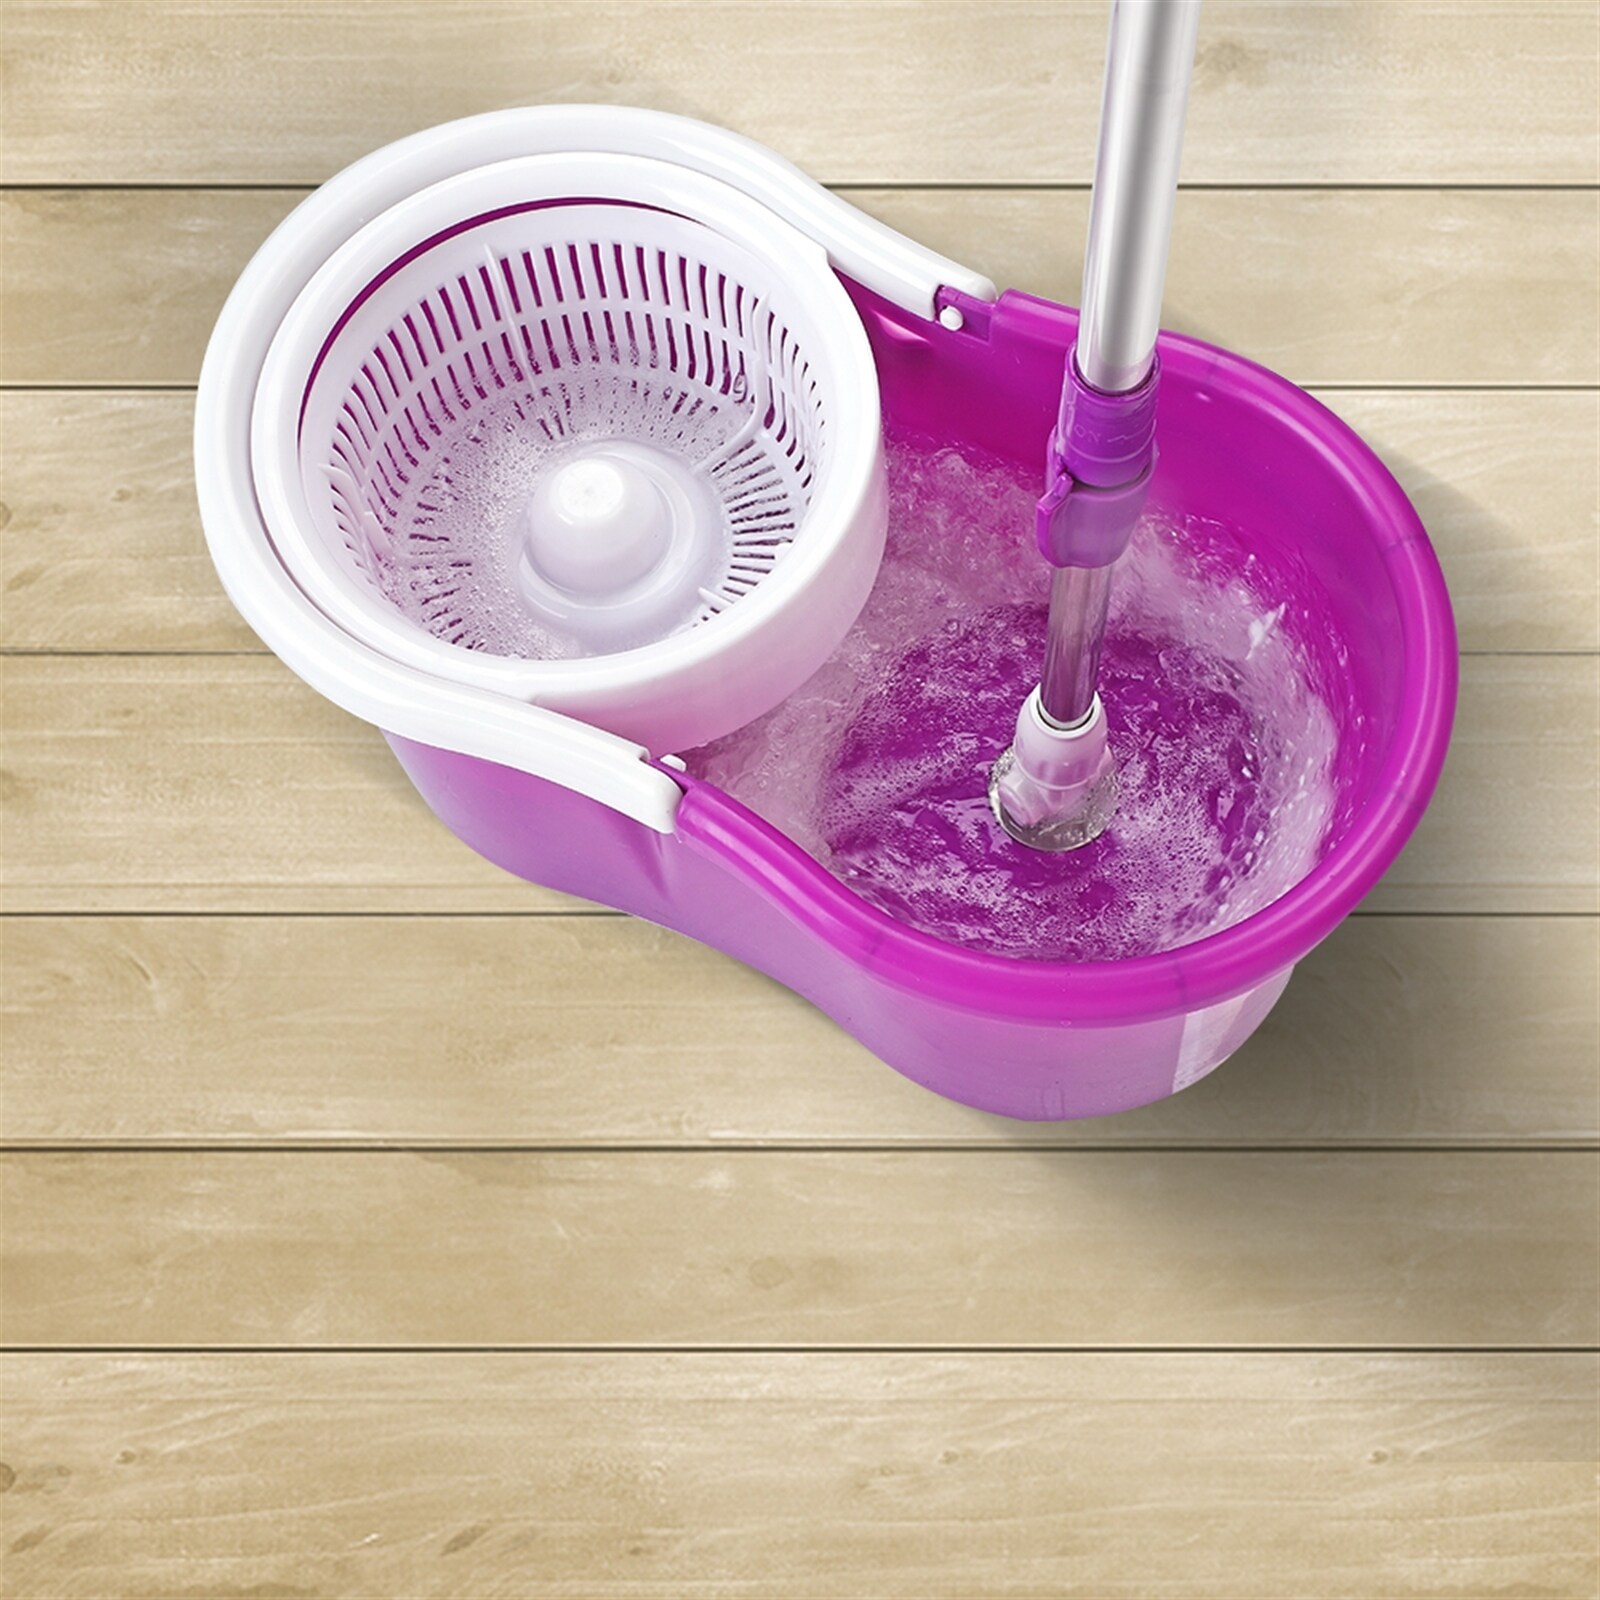 https://ak1.ostkcdn.com/images/products/is/images/direct/1cdc92eca1796b869e2be0a585cb1eaf83475677/360%C2%B0-Spin-Mop-with-Bucket-%26-Dual-Mop-Heads.jpg